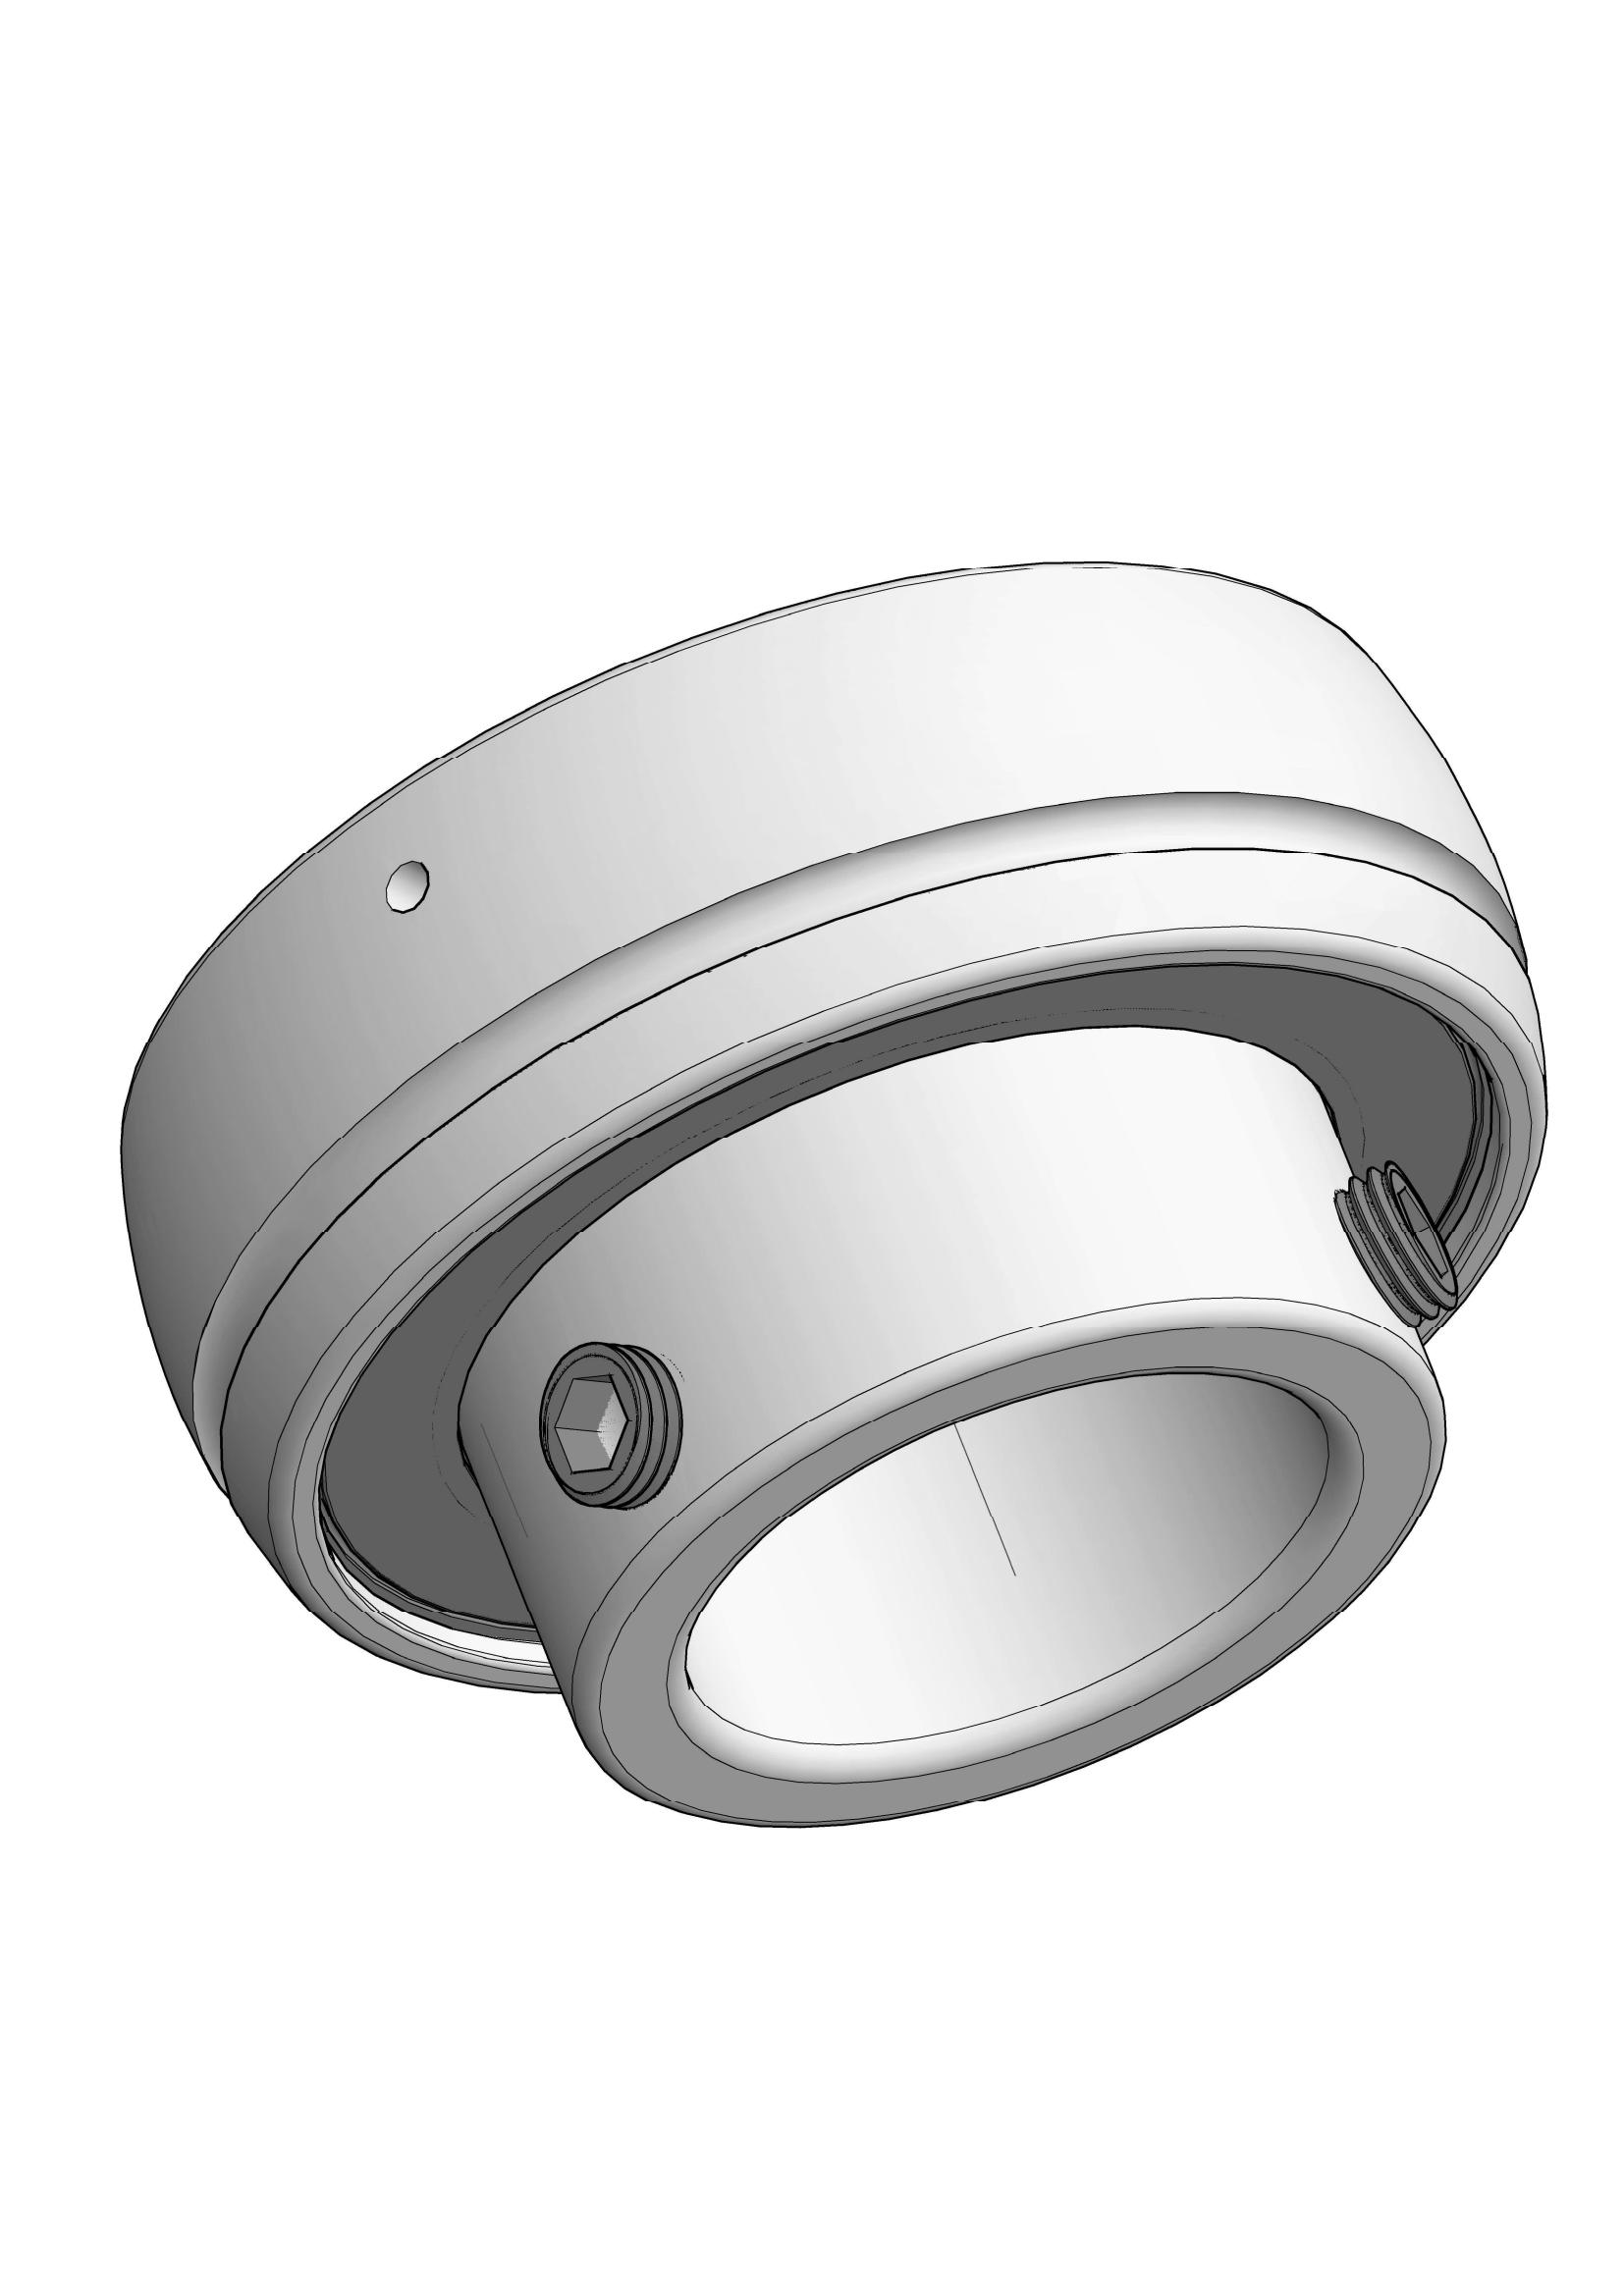 SB201-8 insert ball bearings with Eccentric Collar Lock with 1/2 inch Bore